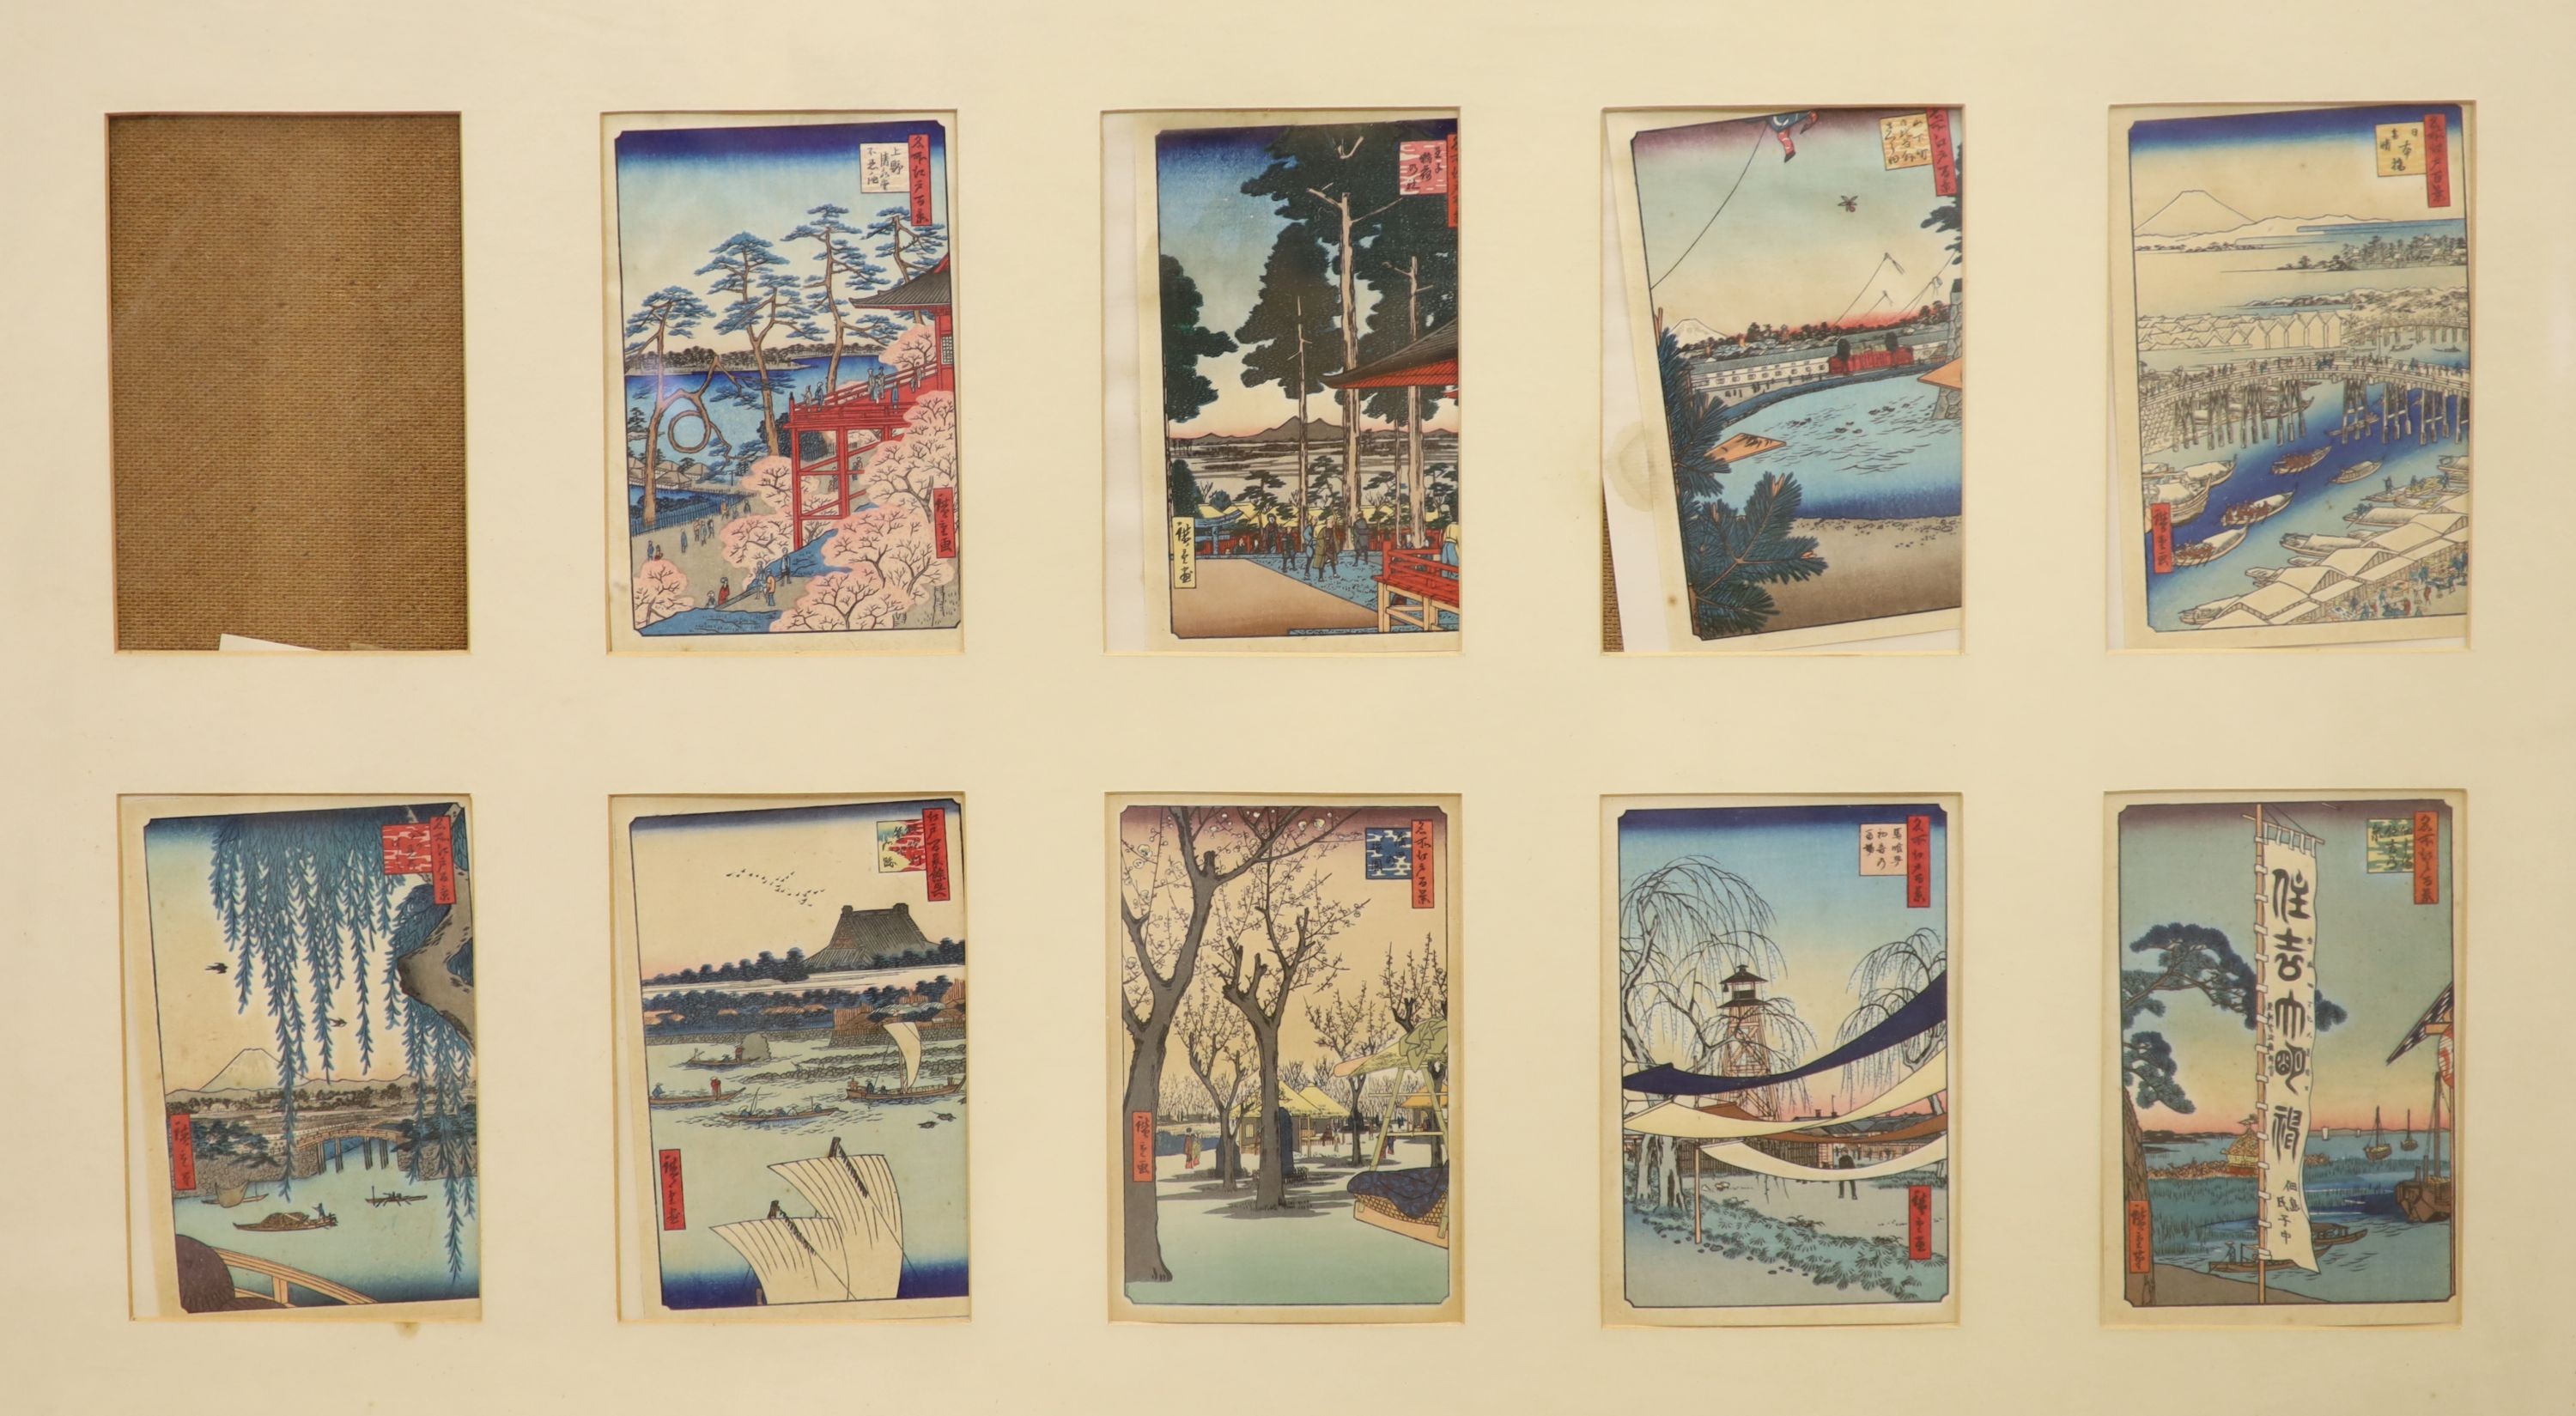 Hiroshige, set of twenty woodblock prints, Scenes from views along the Tokaido Road, 15 x 10cm, framed as two